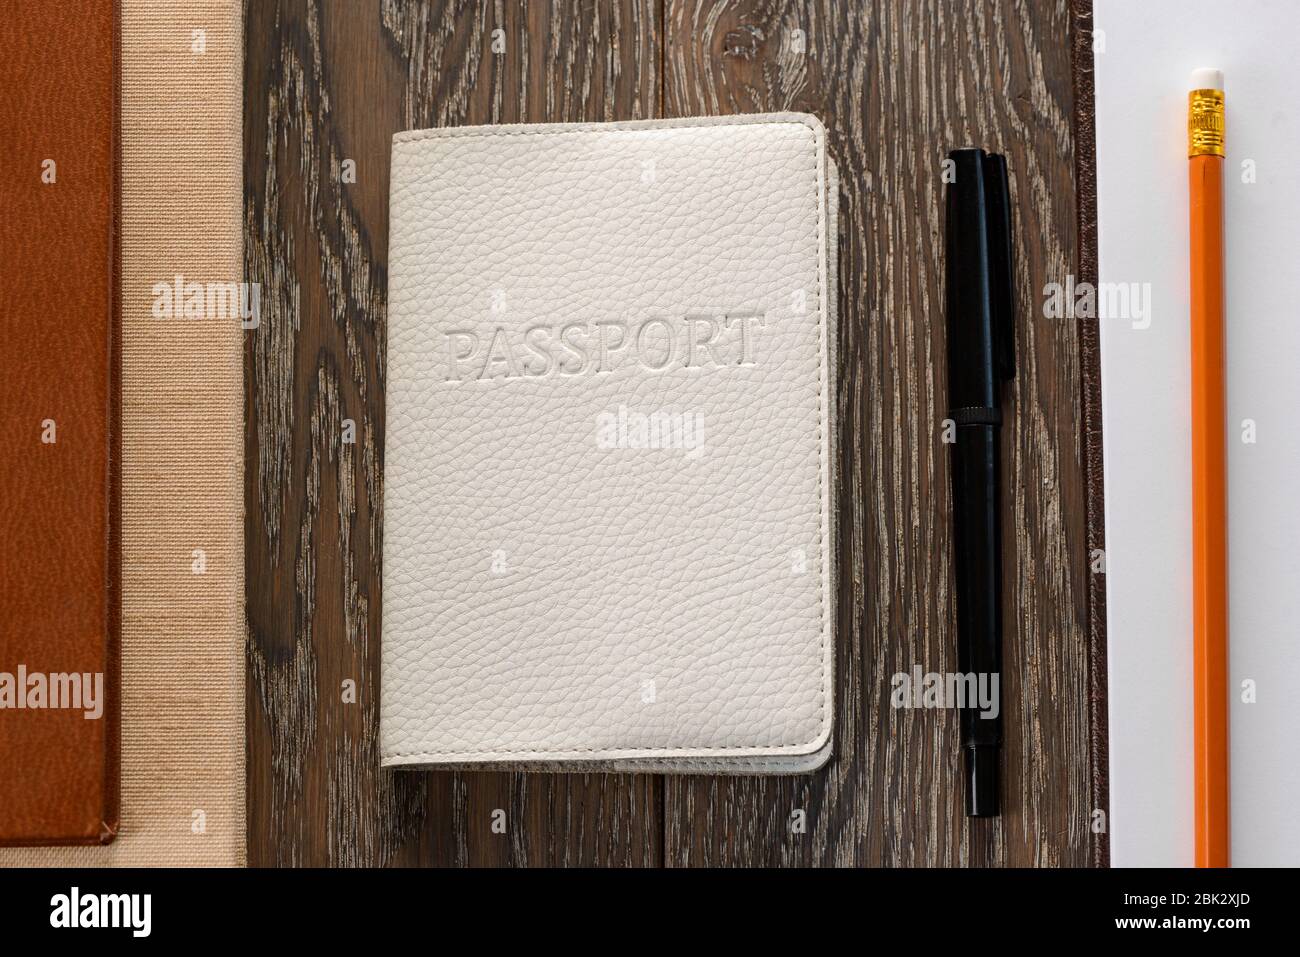 Passport, law book, application form and pen Stock Photo